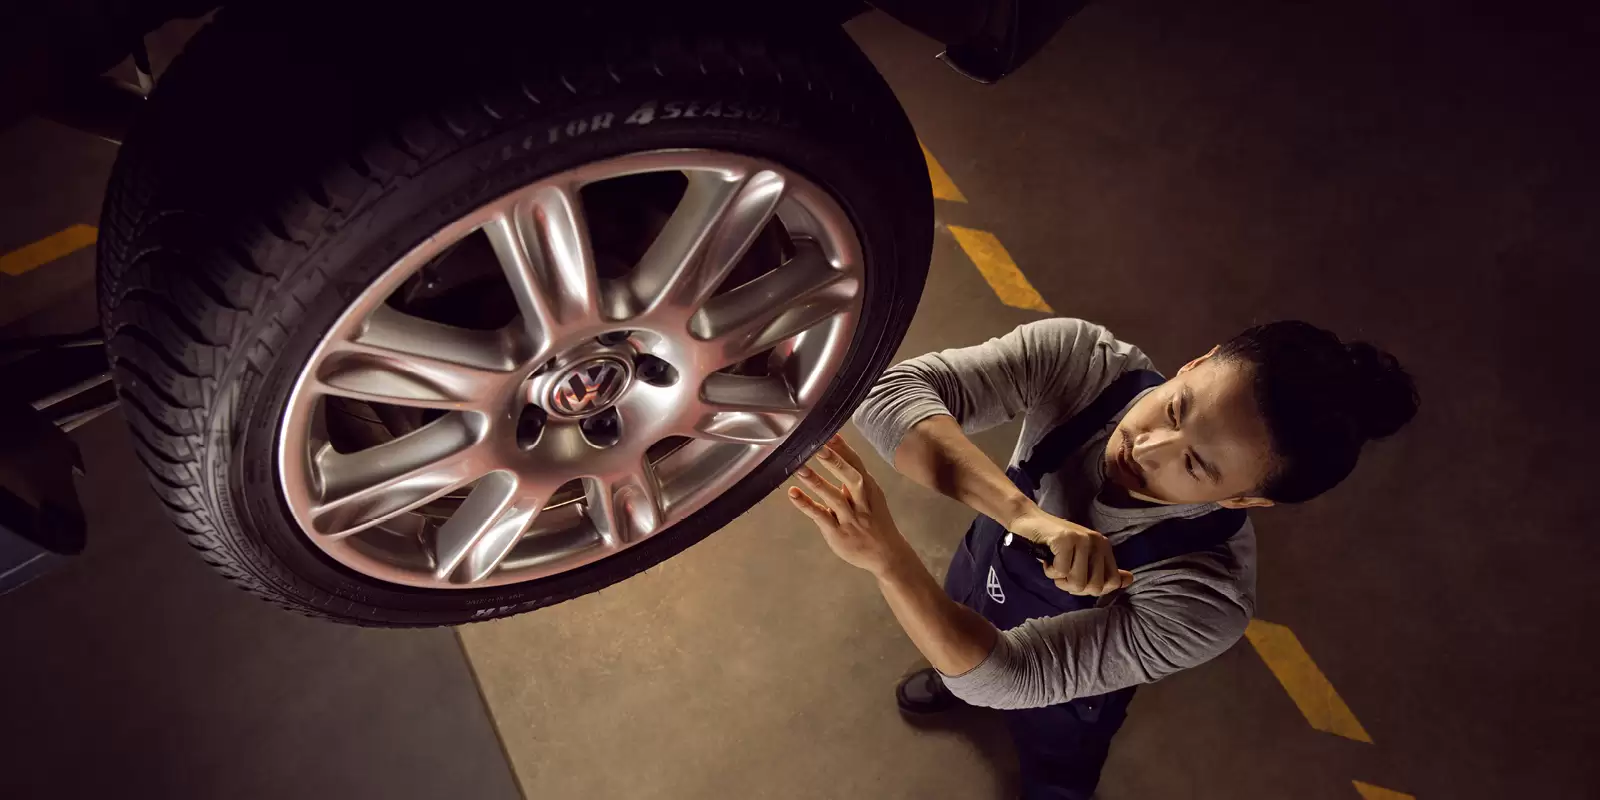 Mechanic looking at a wheel